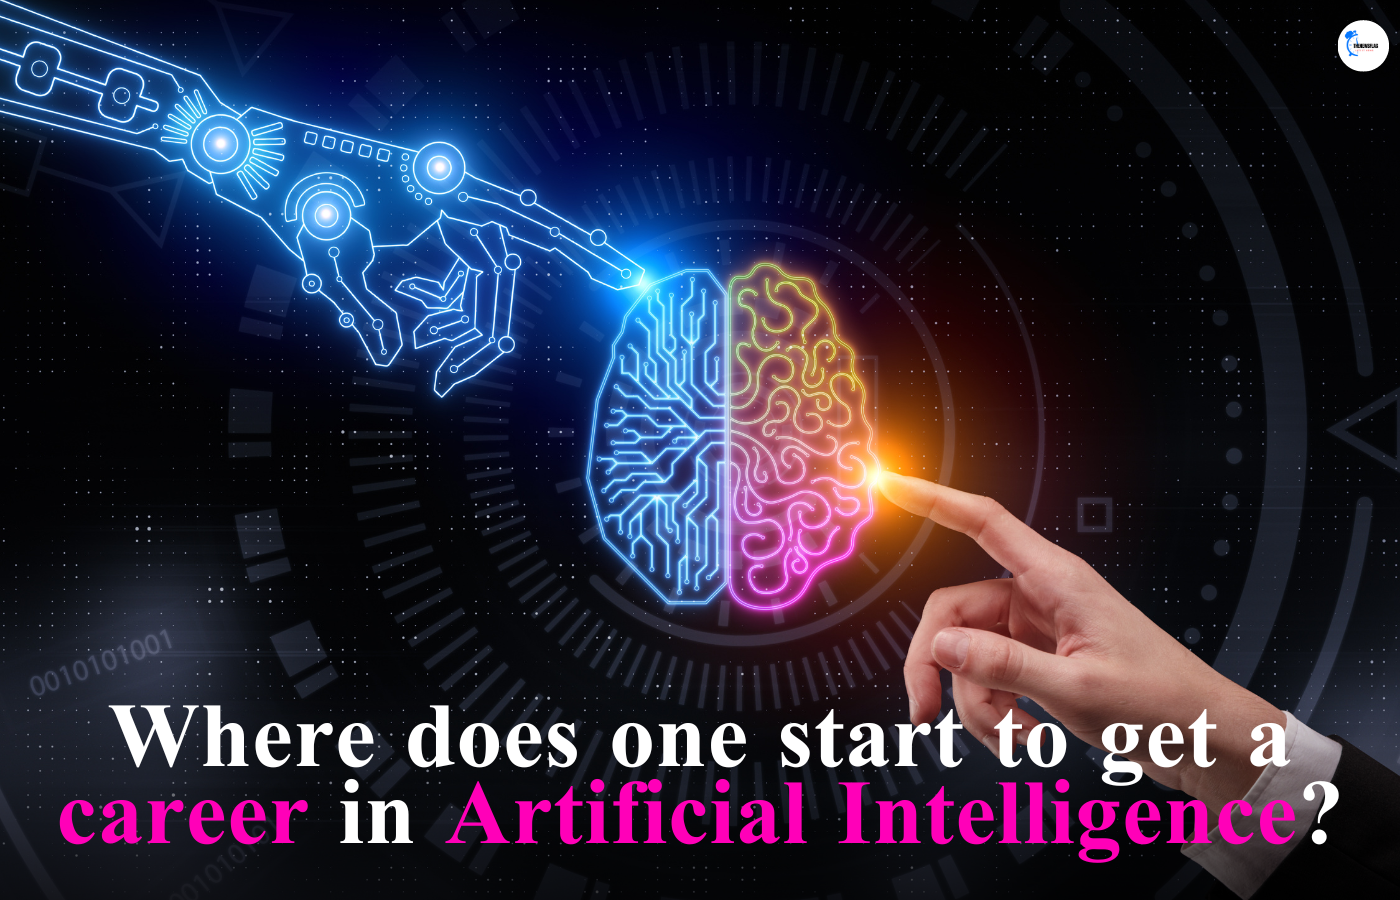 Where does one start to get a career in Artificial Intelligence?